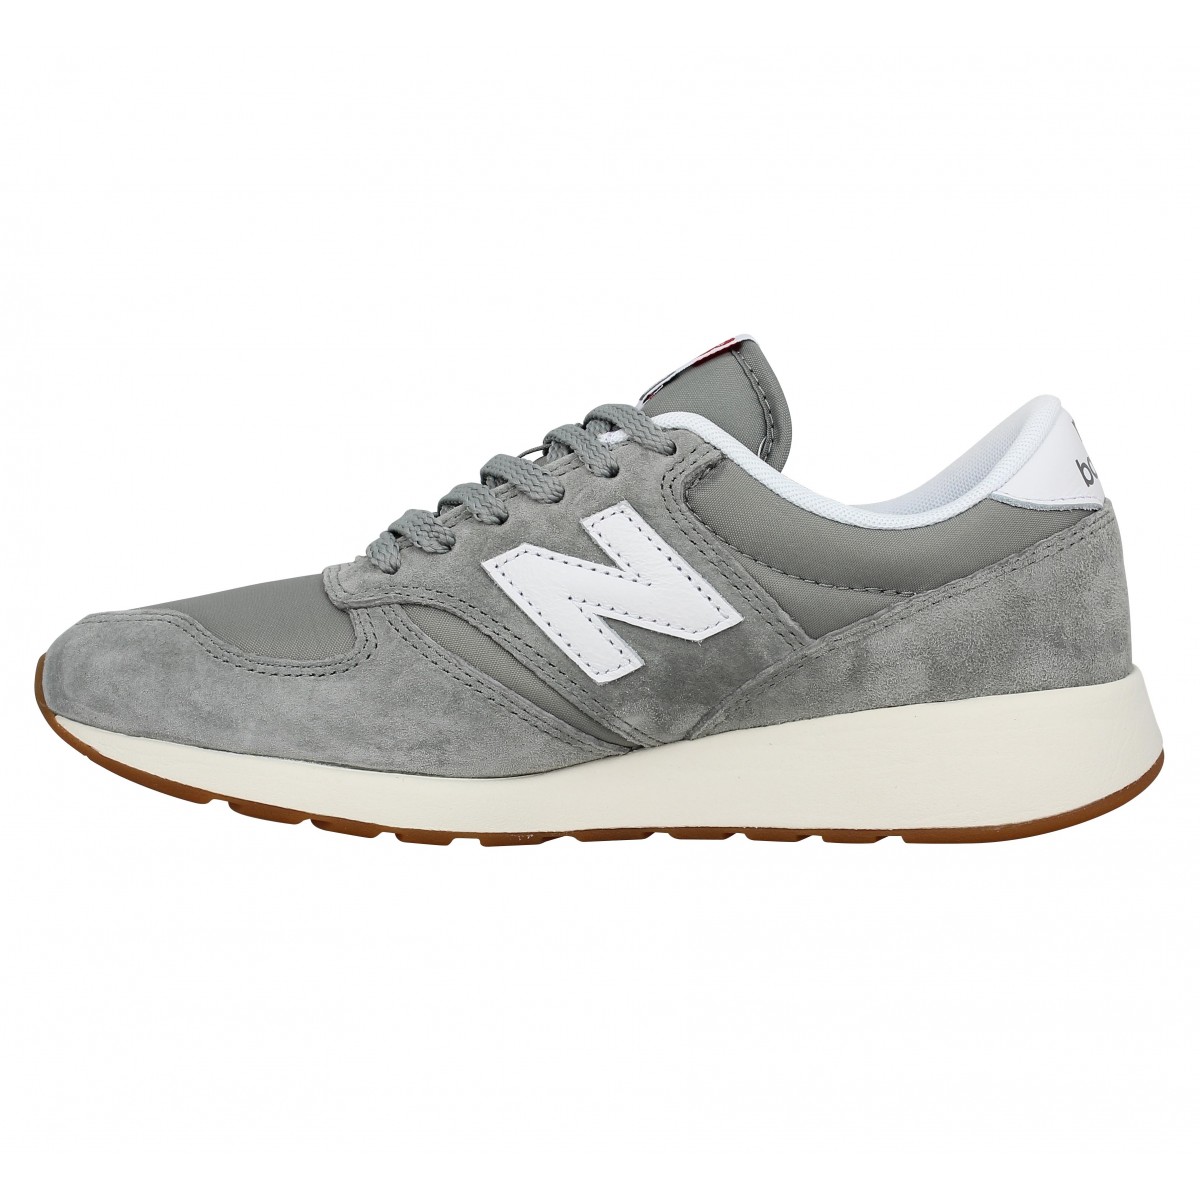 Refinería Catedral contacto New balance wrl 420 velours toile femme gris femme | Fanny chaussures